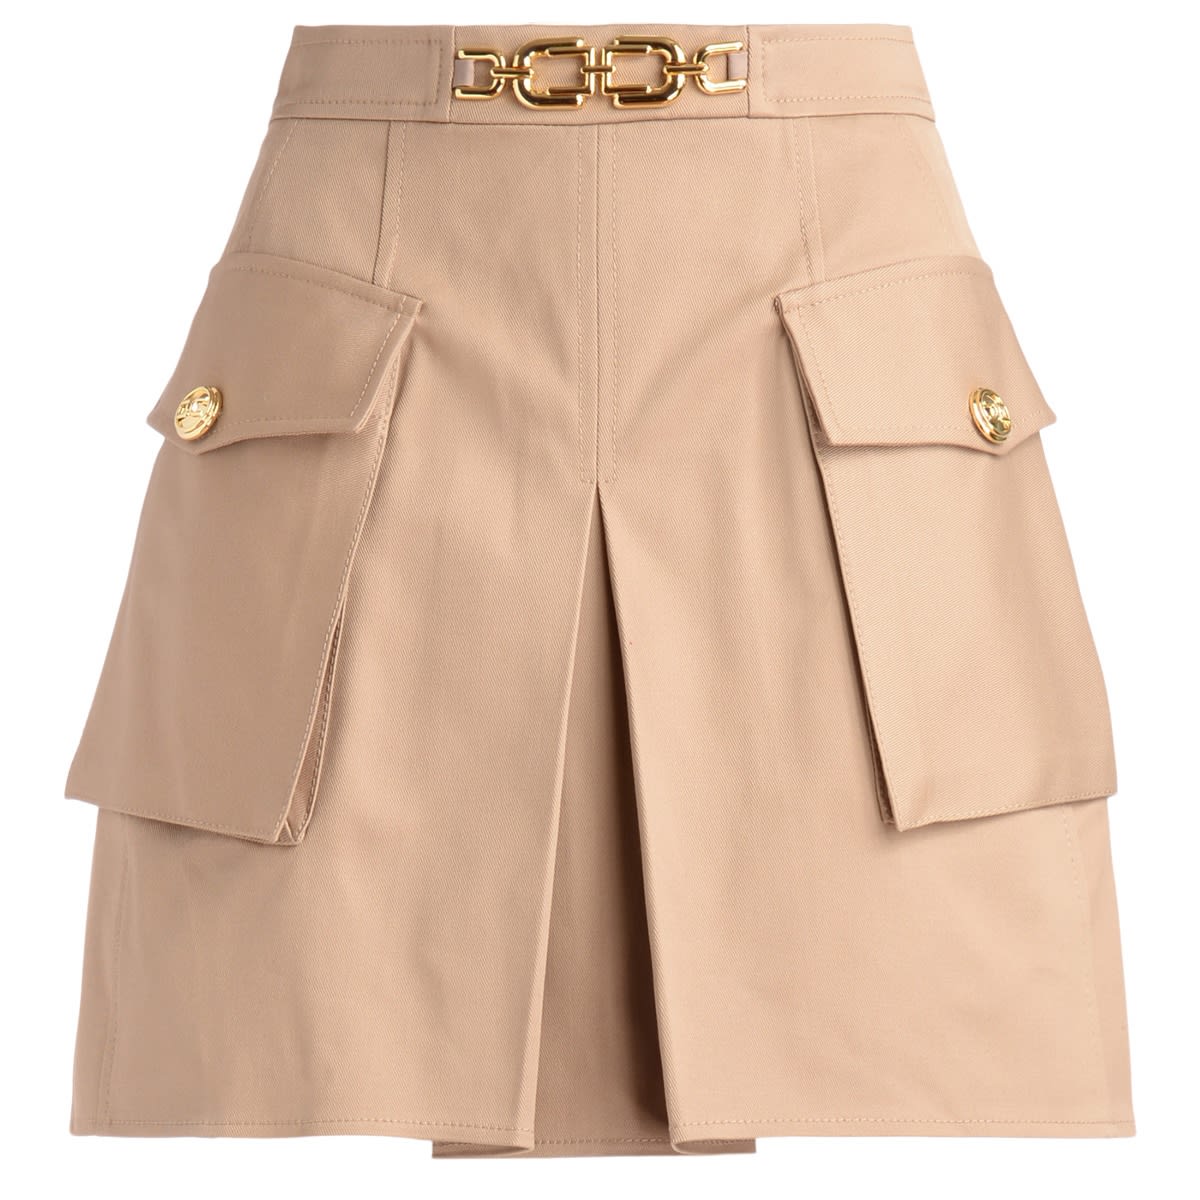 Skirt Elisabetta Franchi Dove Grey With Double Pockets And Buckles